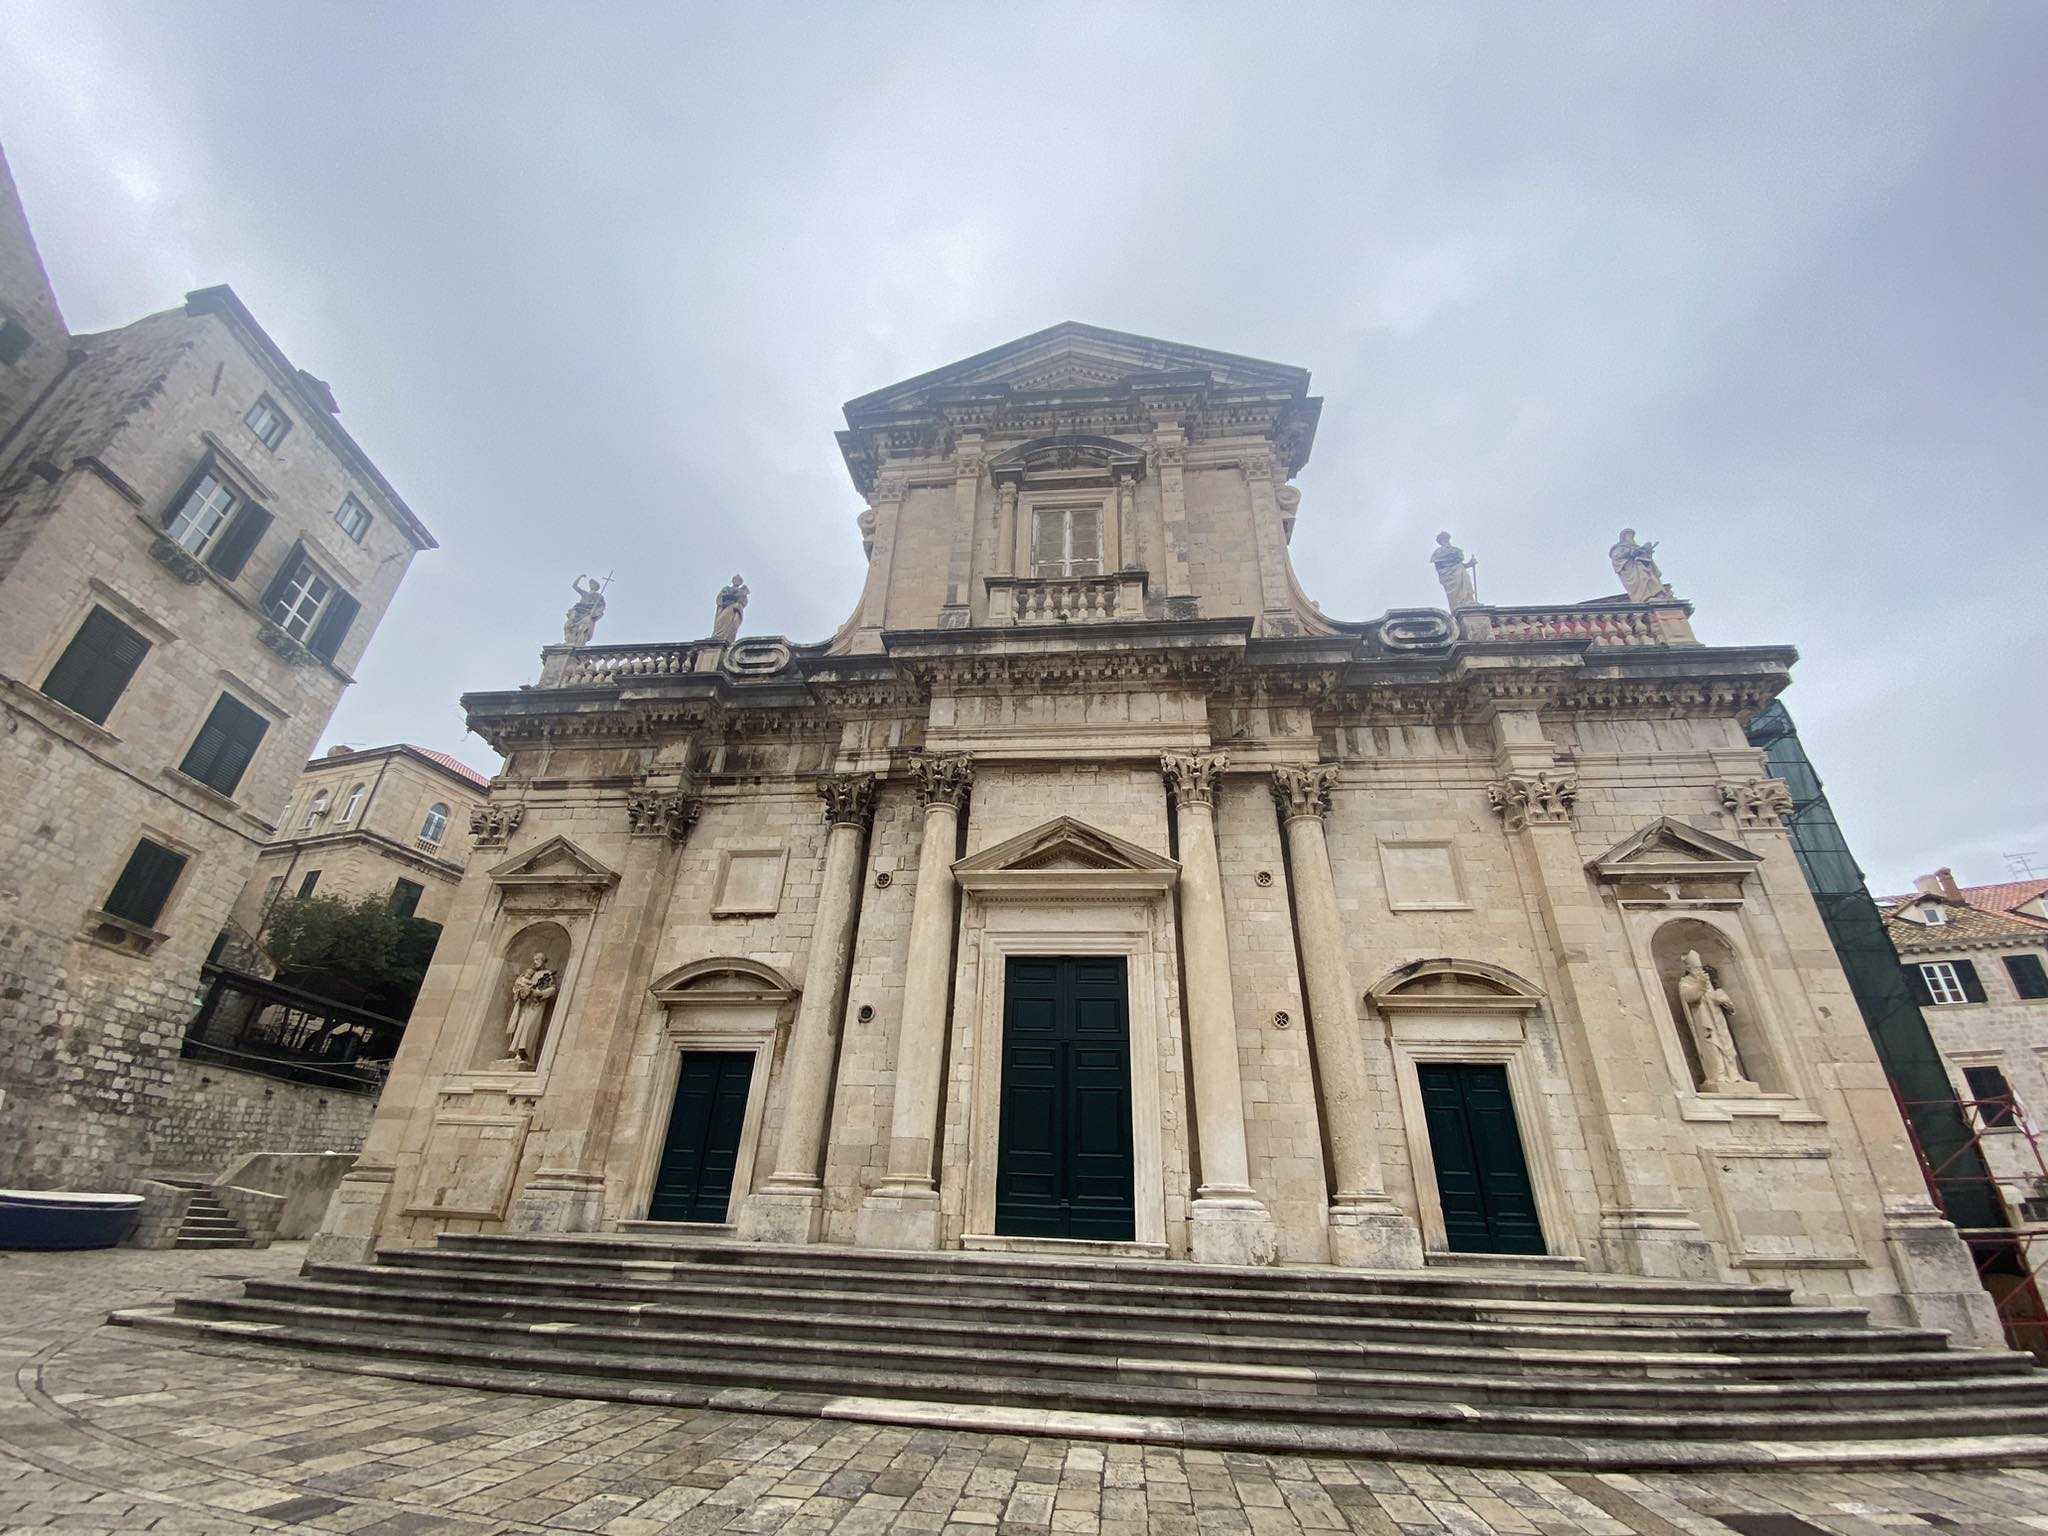 Cathedral of the Assumption of the Virgin Mary, Dubrovnik